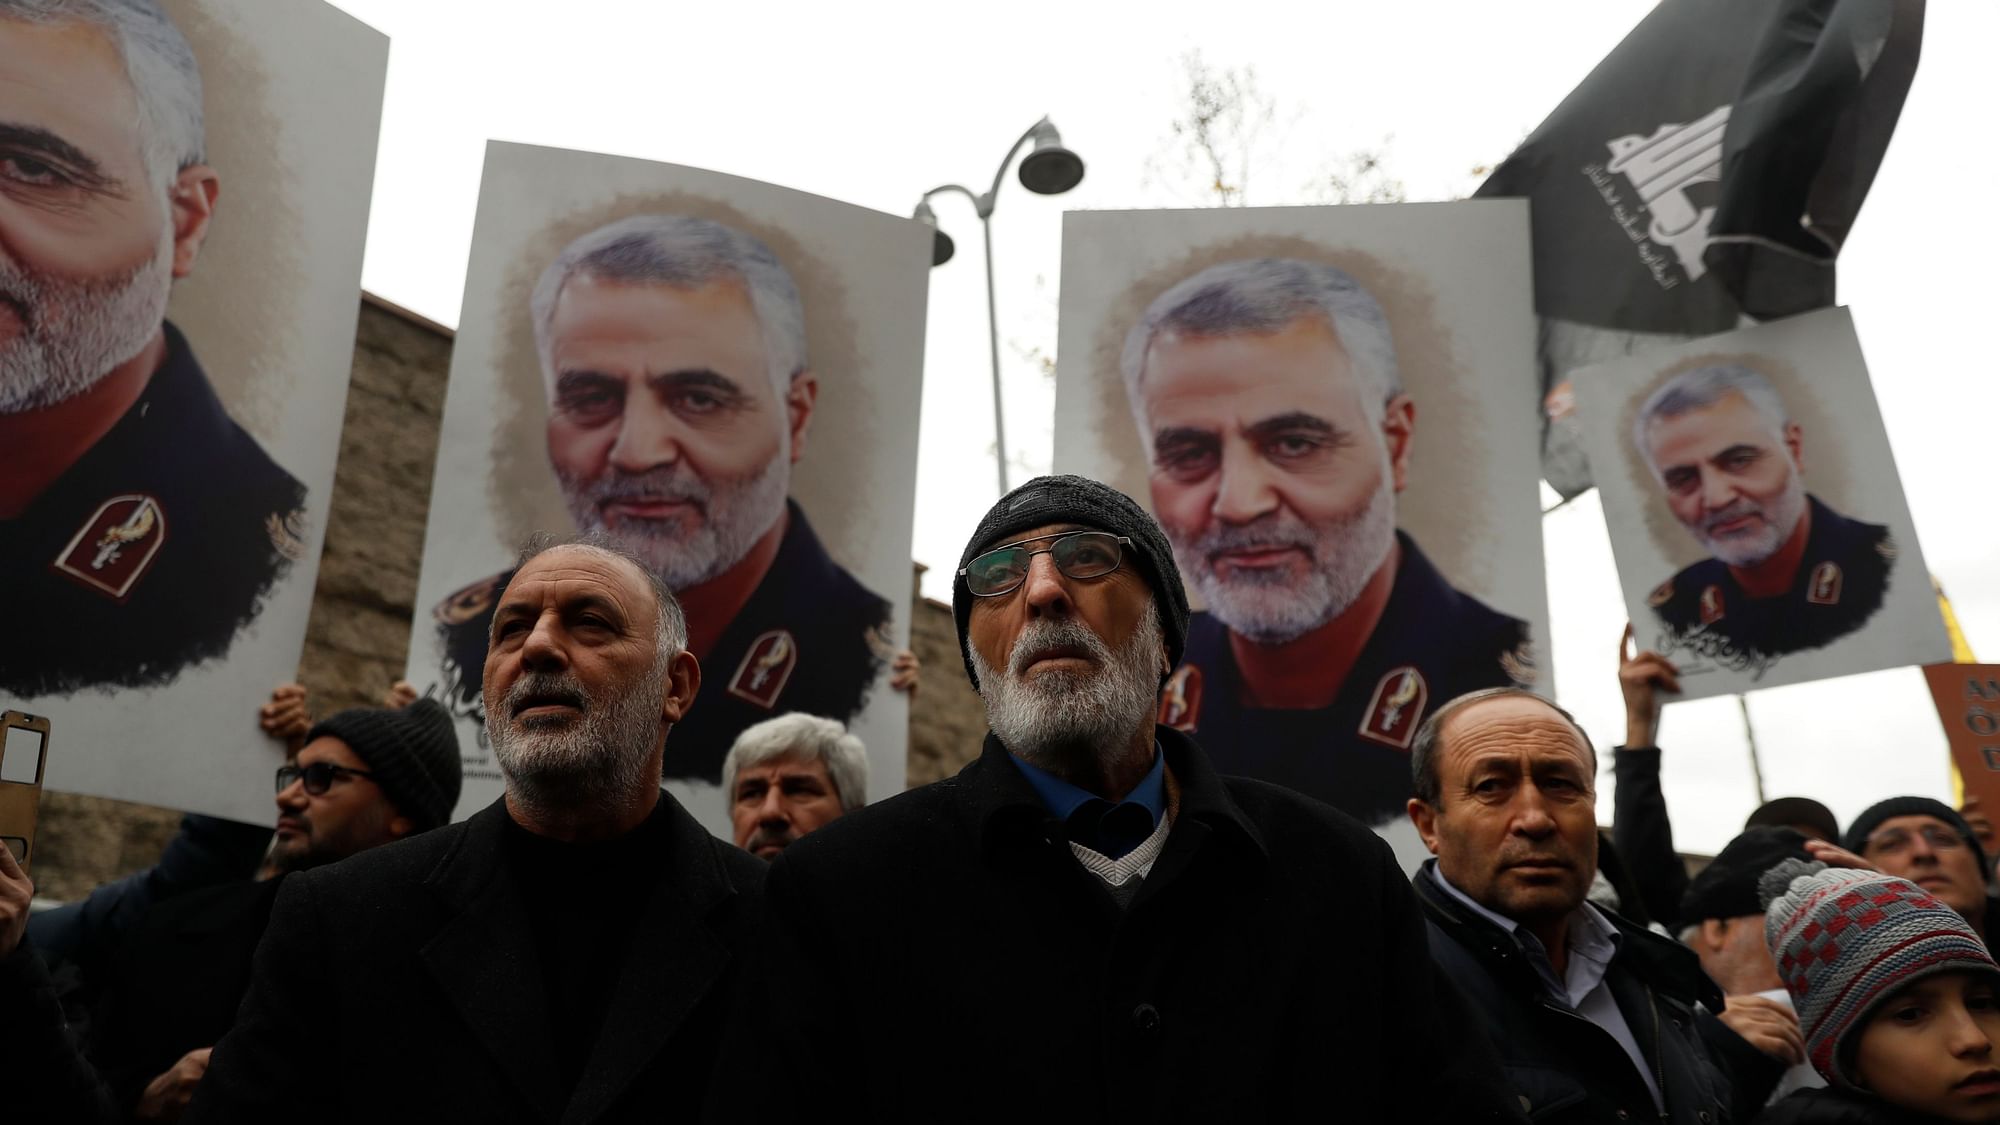 The strikes come after top Iranian General Qassem Soleimani was killed in a US drone strike in Baghdad.&nbsp;